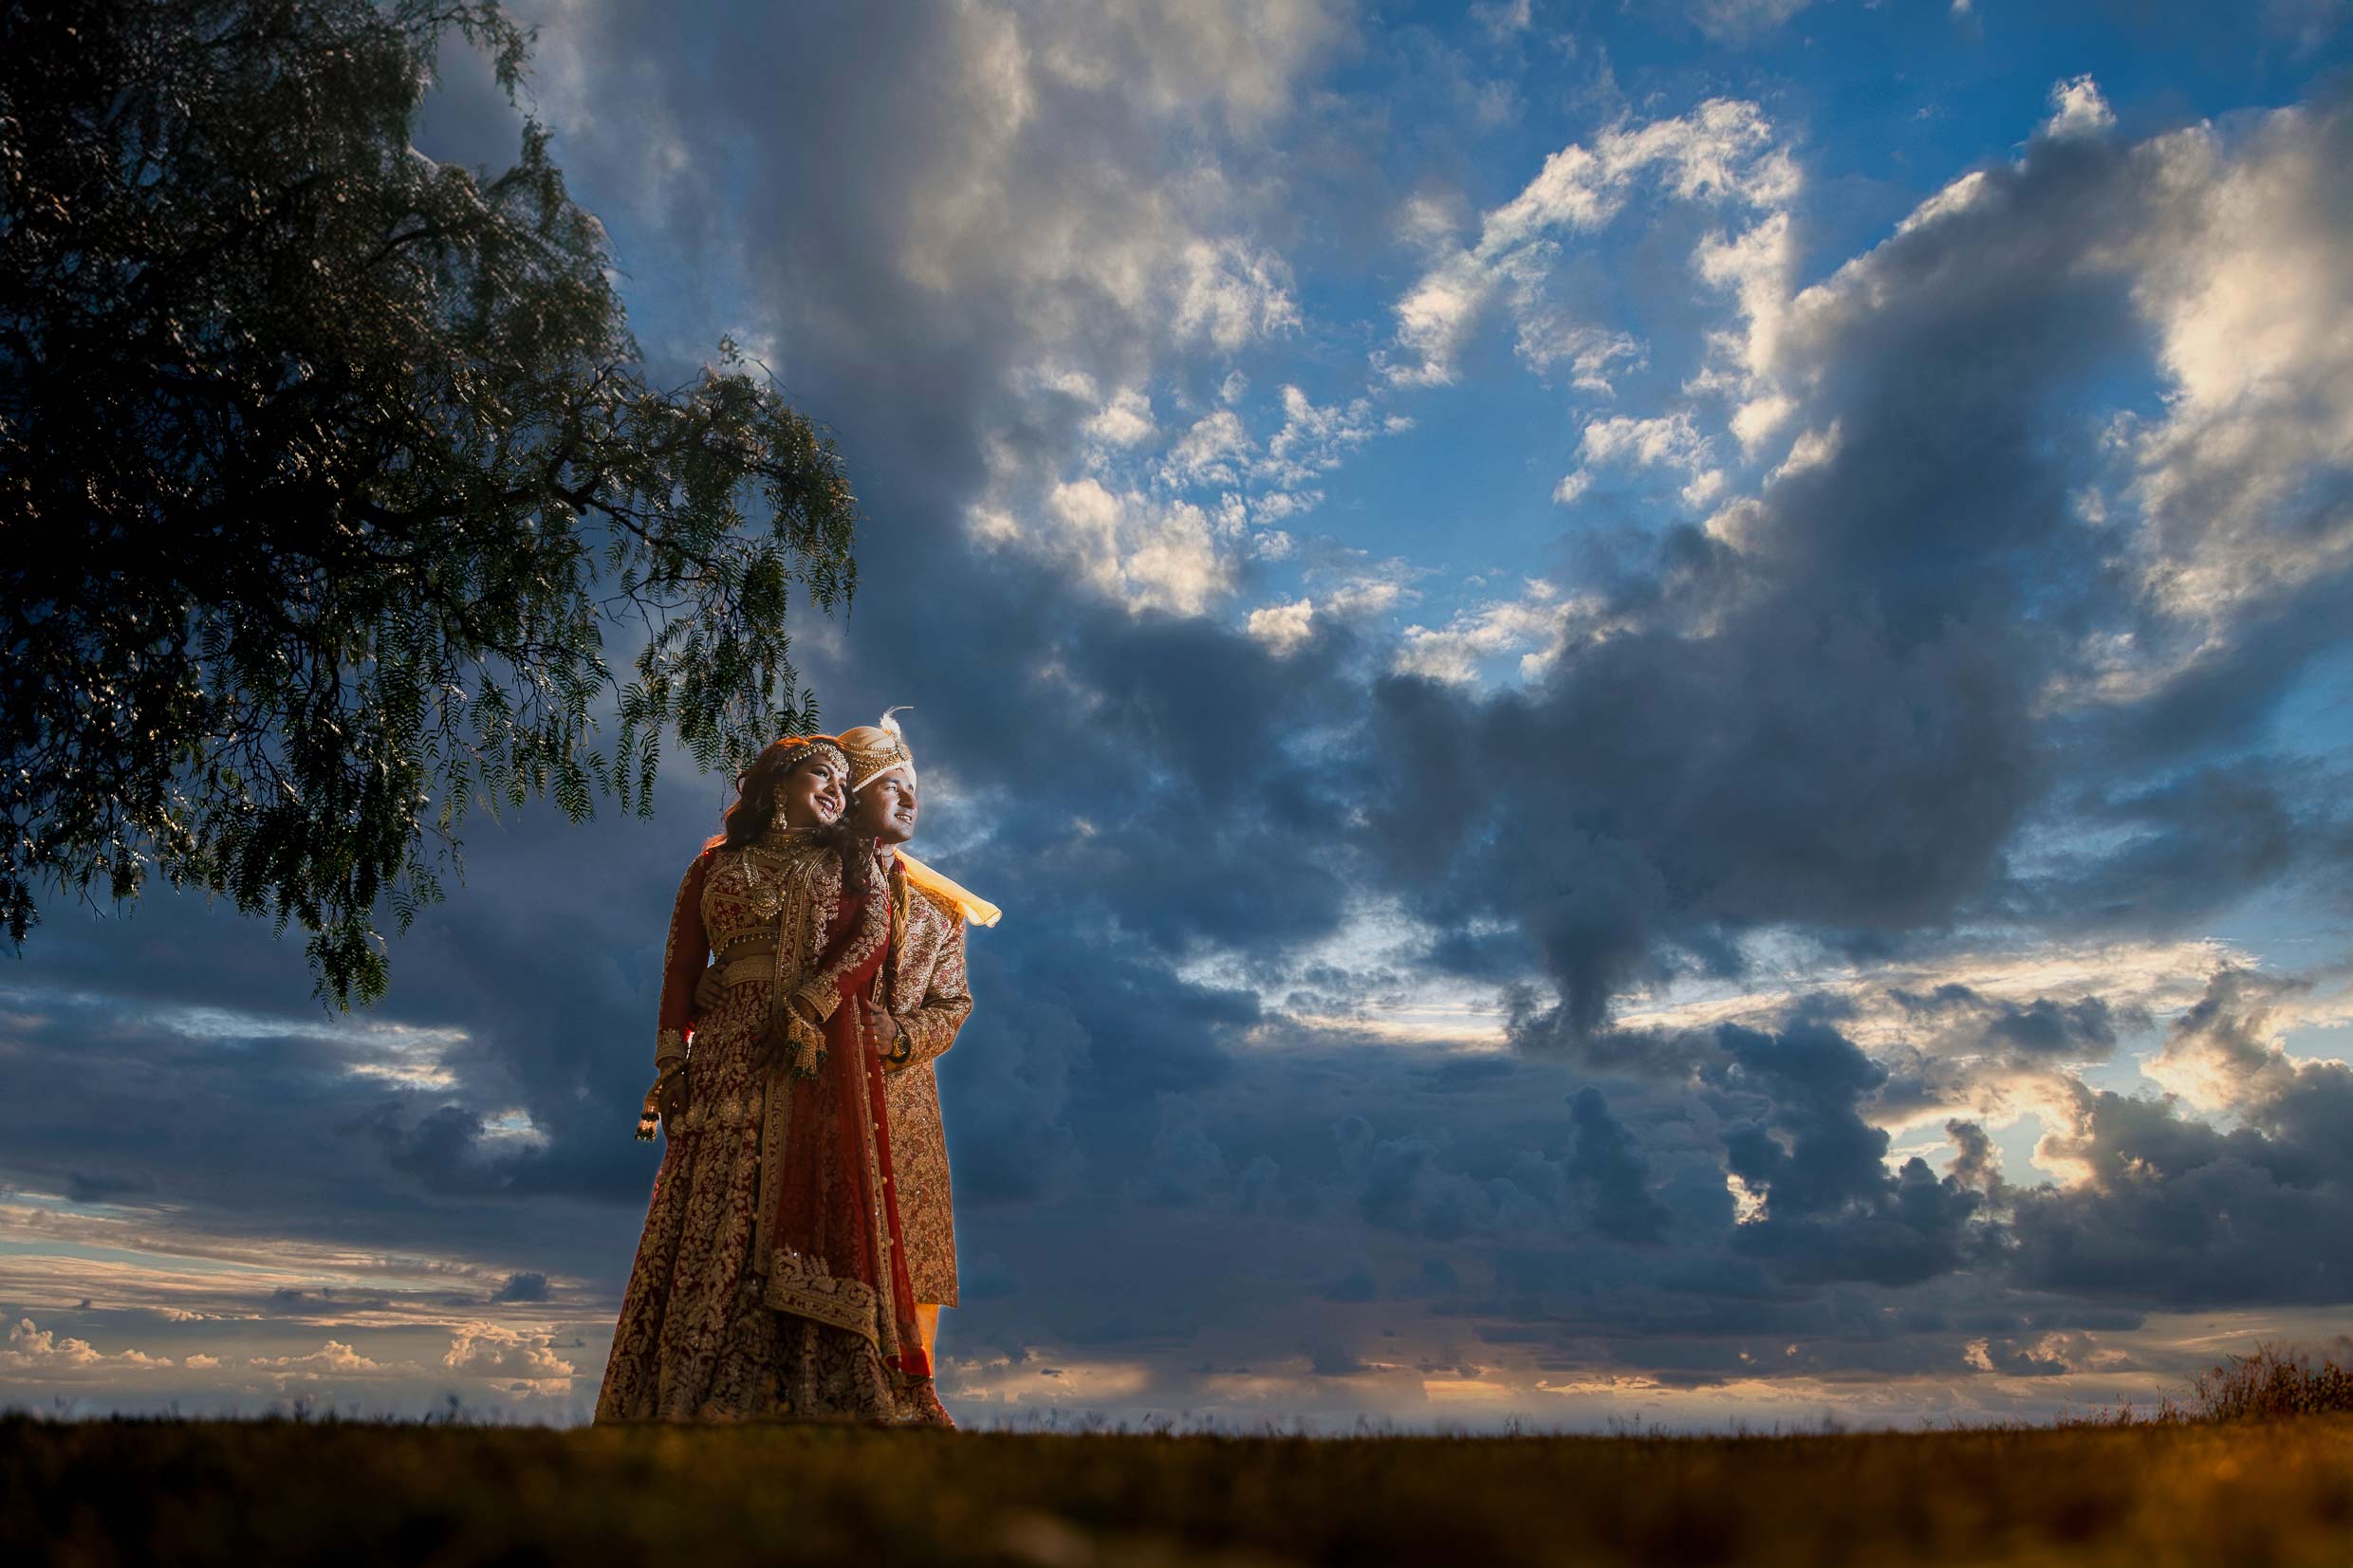 ThomasKim Photography Los Angeles Wedding Photographer A couple in traditional attire stands under a large tree against a dramatic, cloudy sky at sunset, captured perfectly by their wedding photographer in Los Angeles.